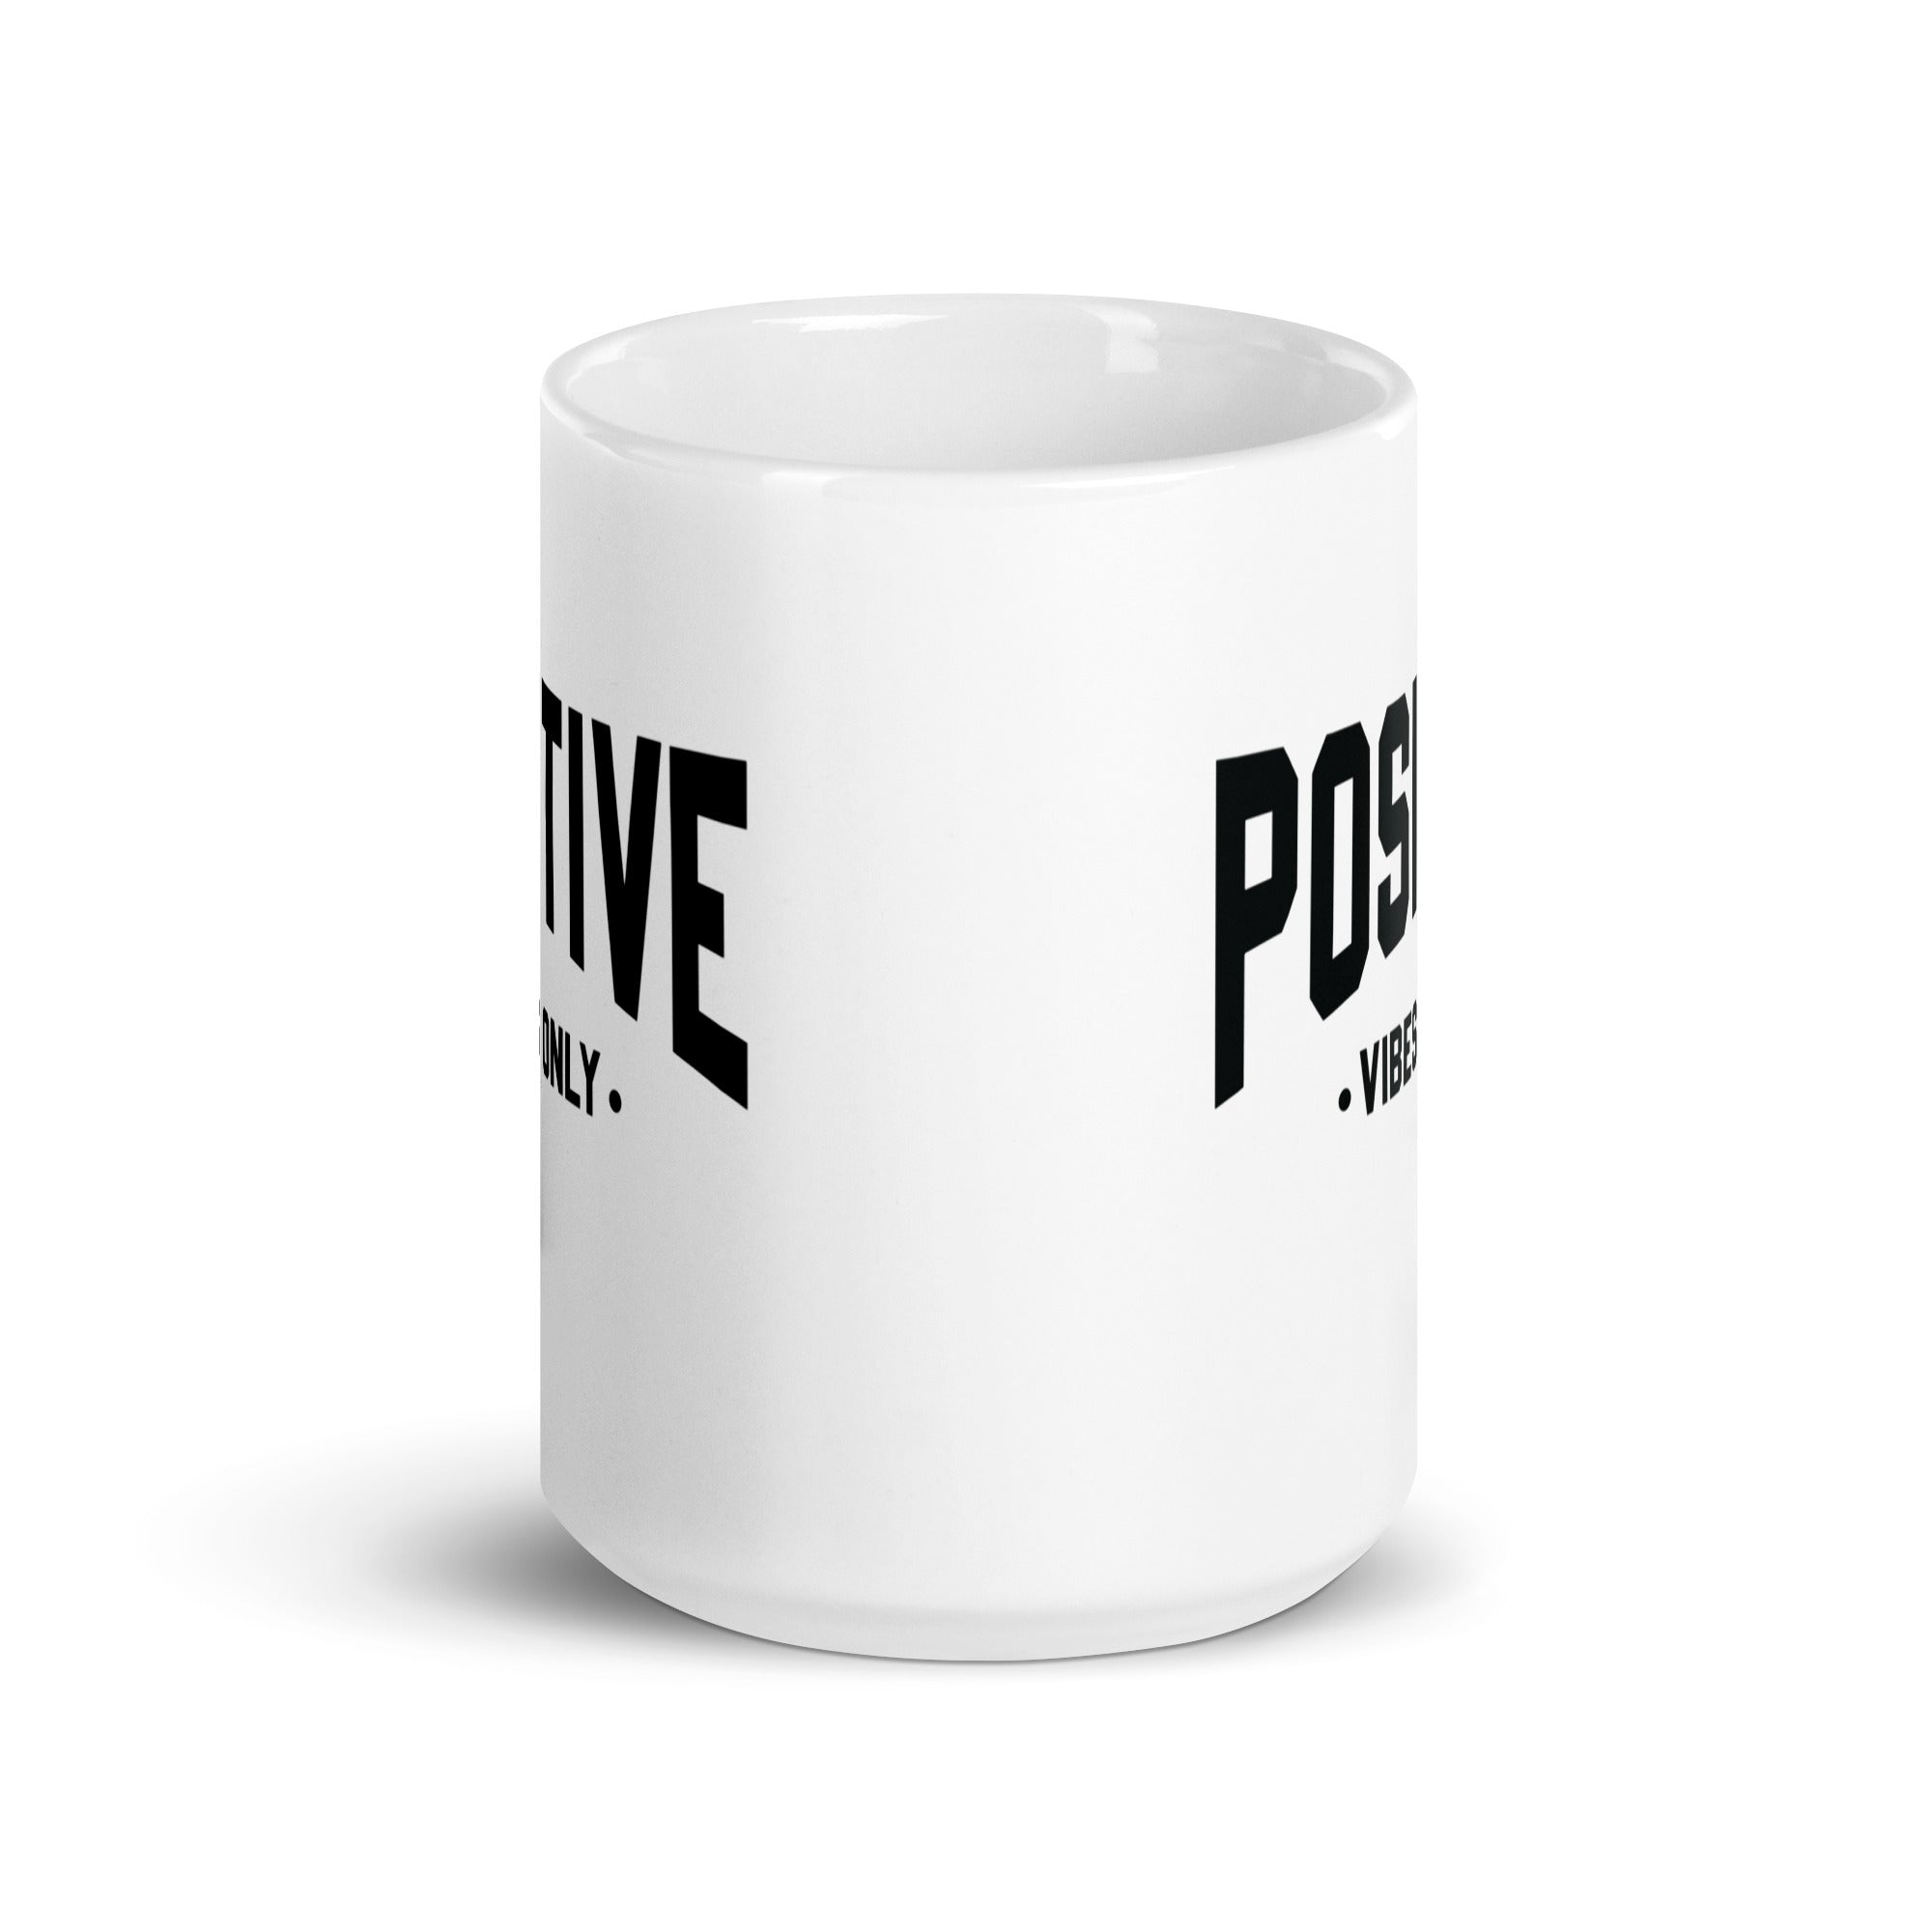 White glossy mug | Positive Vibes Only